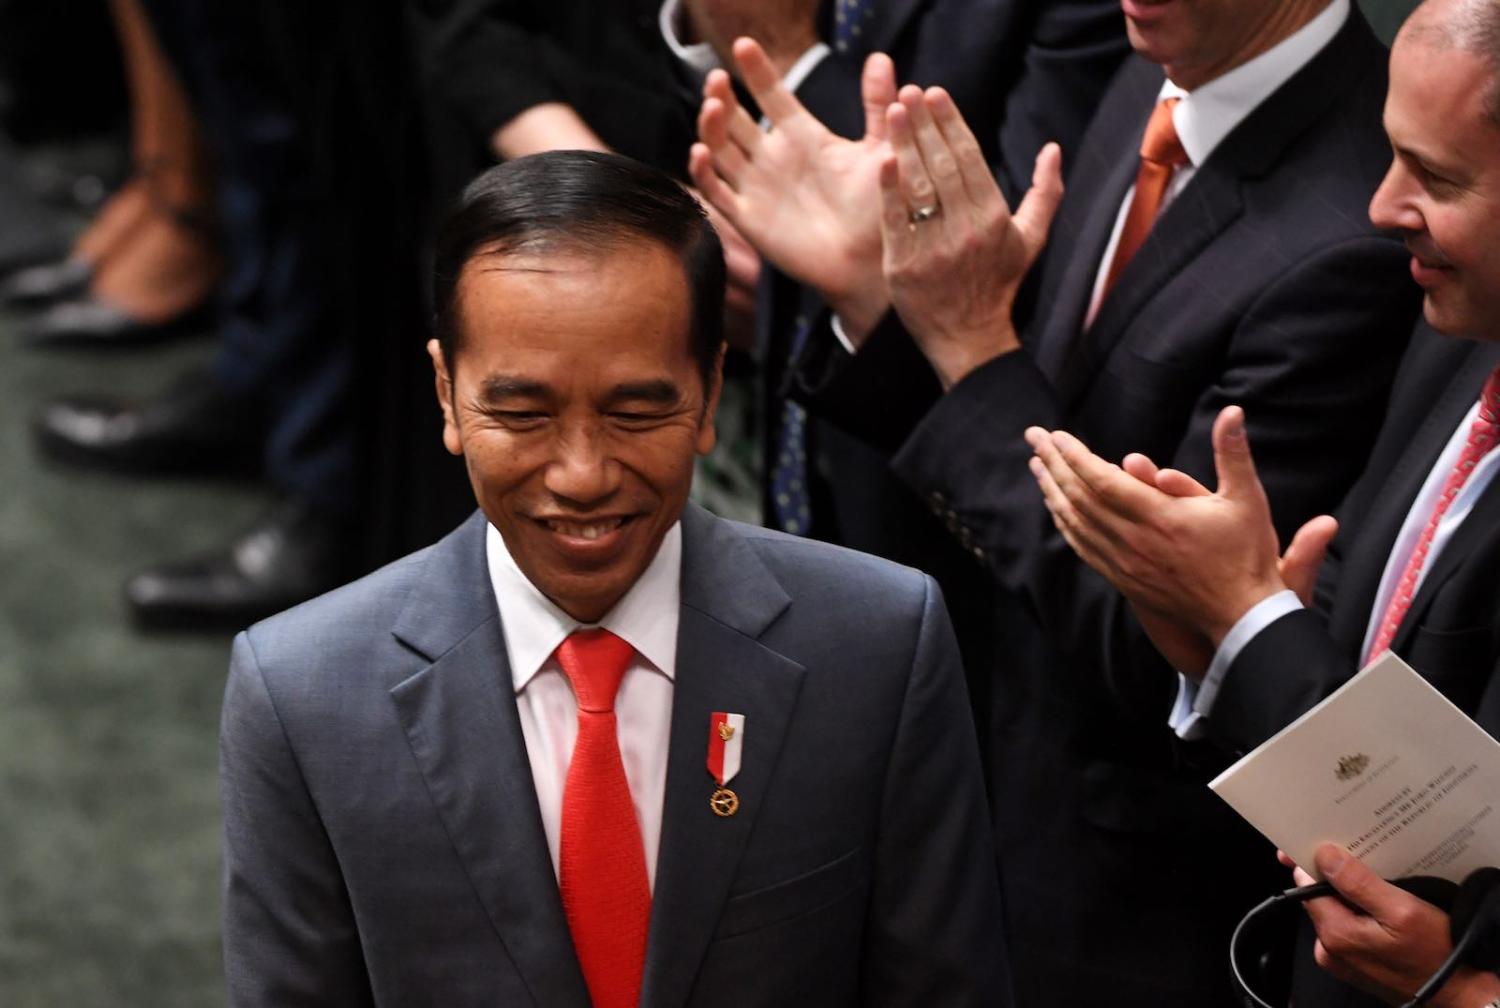 Welcoming Joko Widodo to the floor of the House of Representatives in the Australian parliament (Tracey Nearmy/Getty Images)